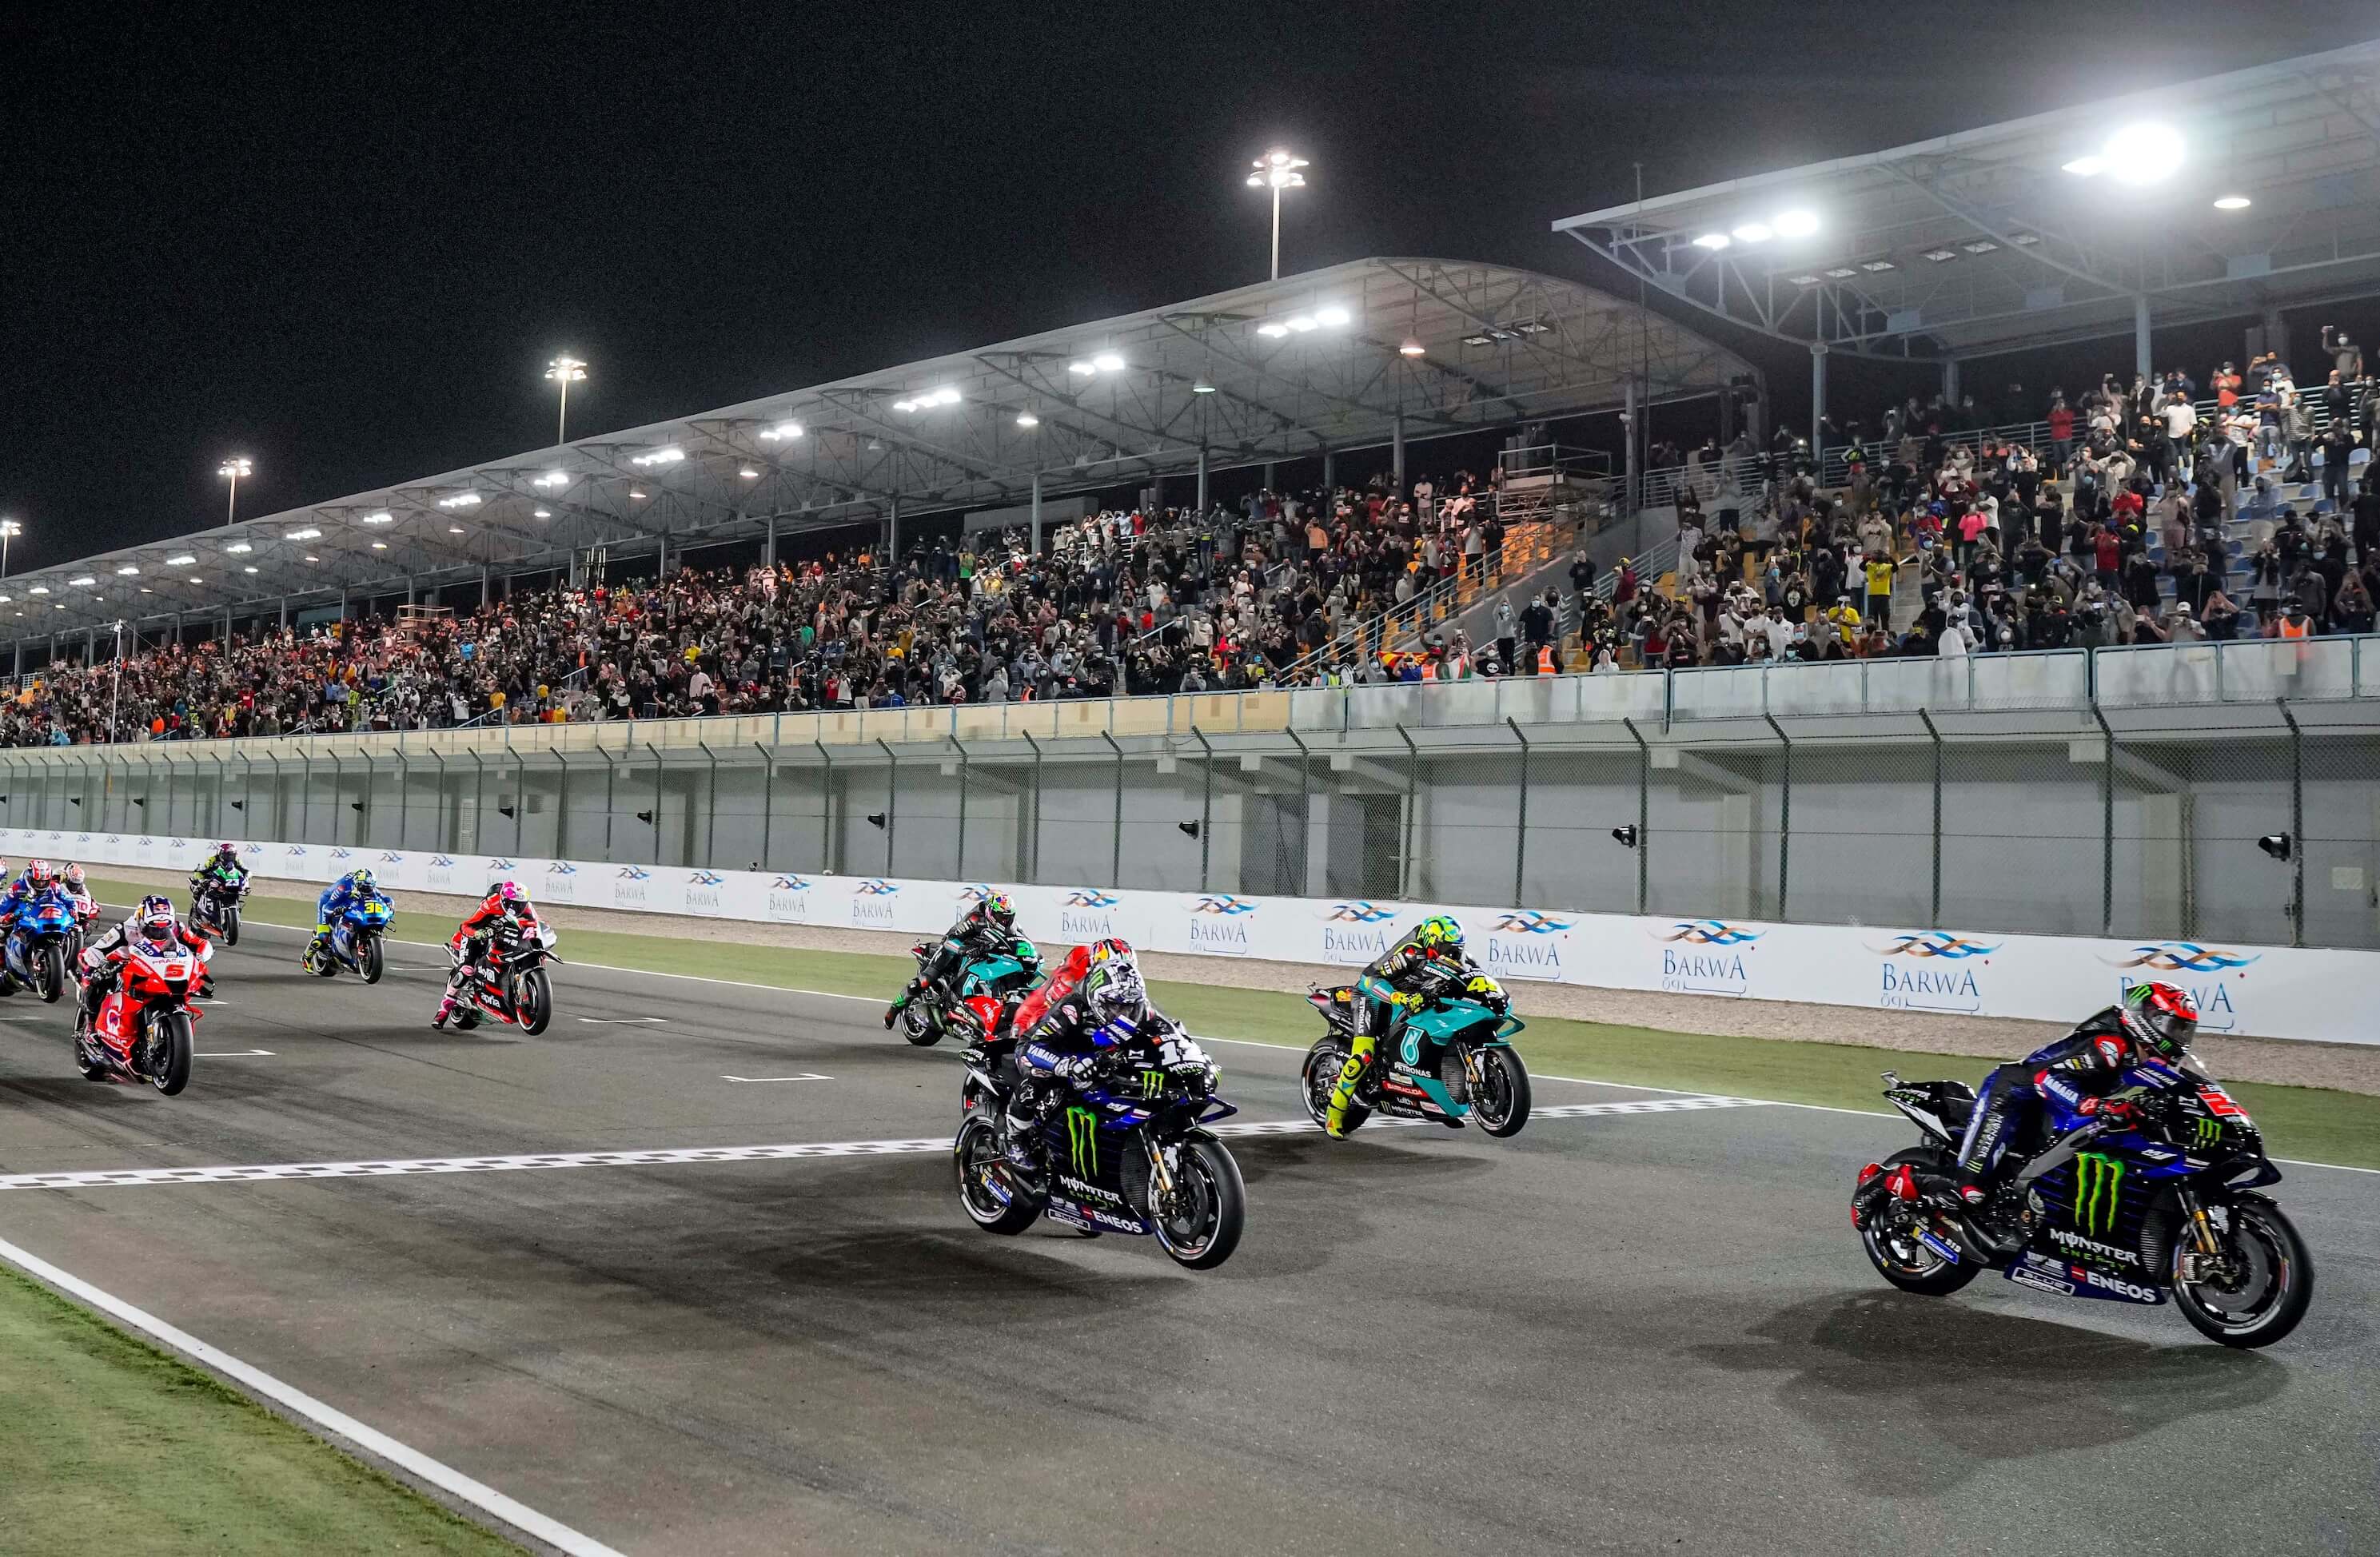 The Season Open of the 2022 MotoGP World Championship to be Hosted at the Lusail Circuit Sports Club